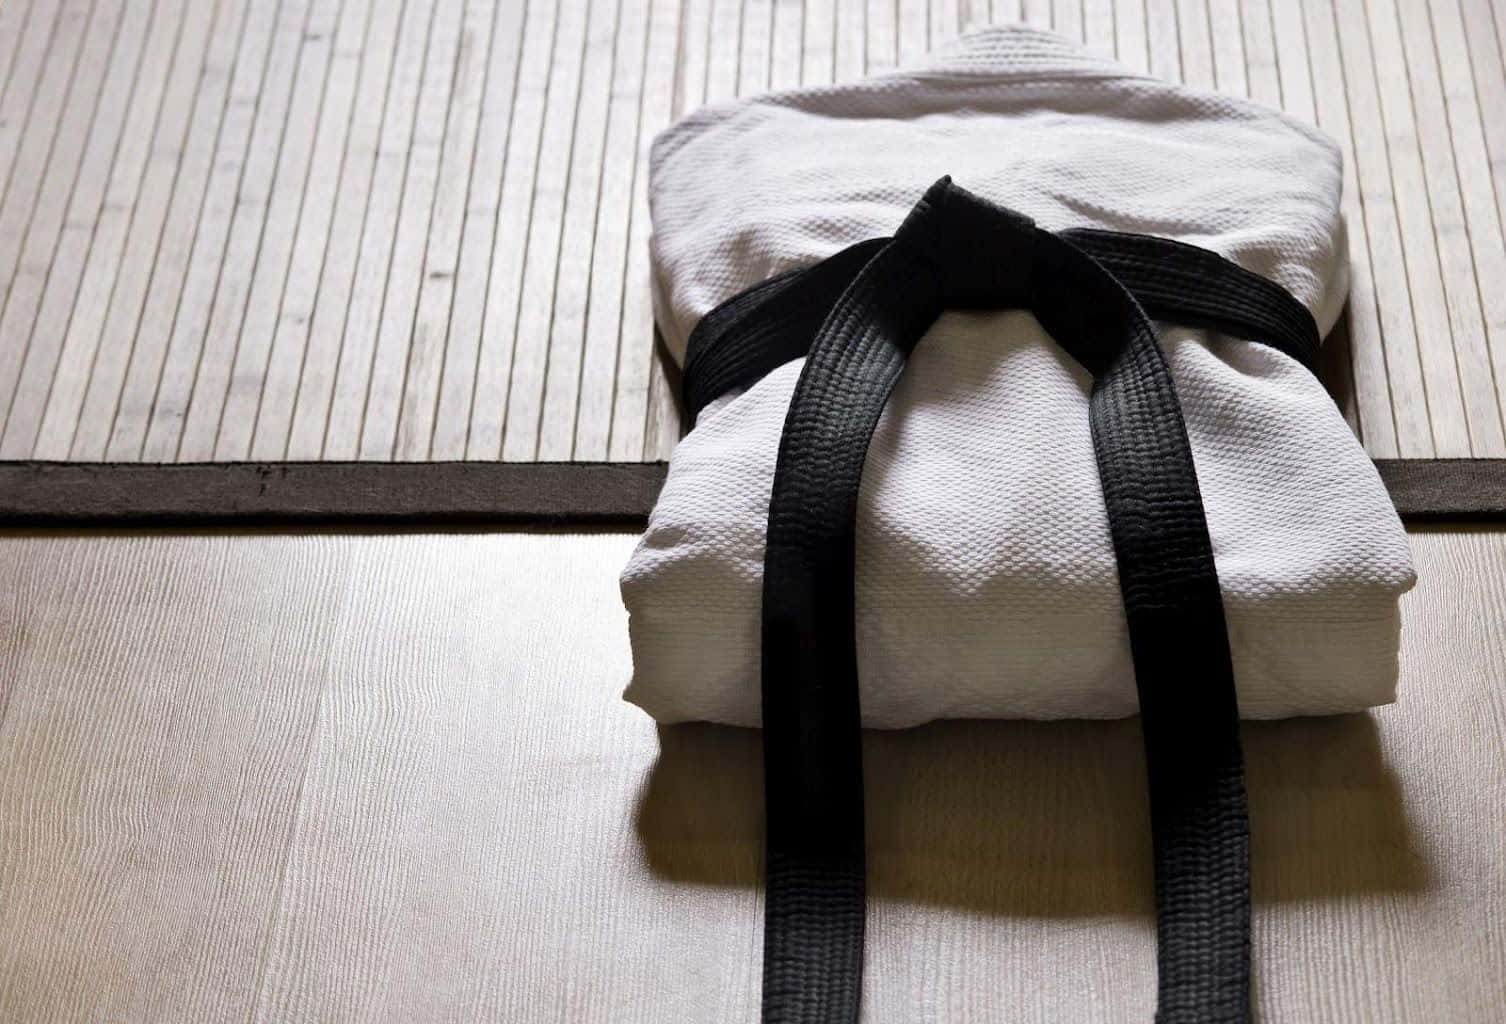 A Towel With A Black Belt On It